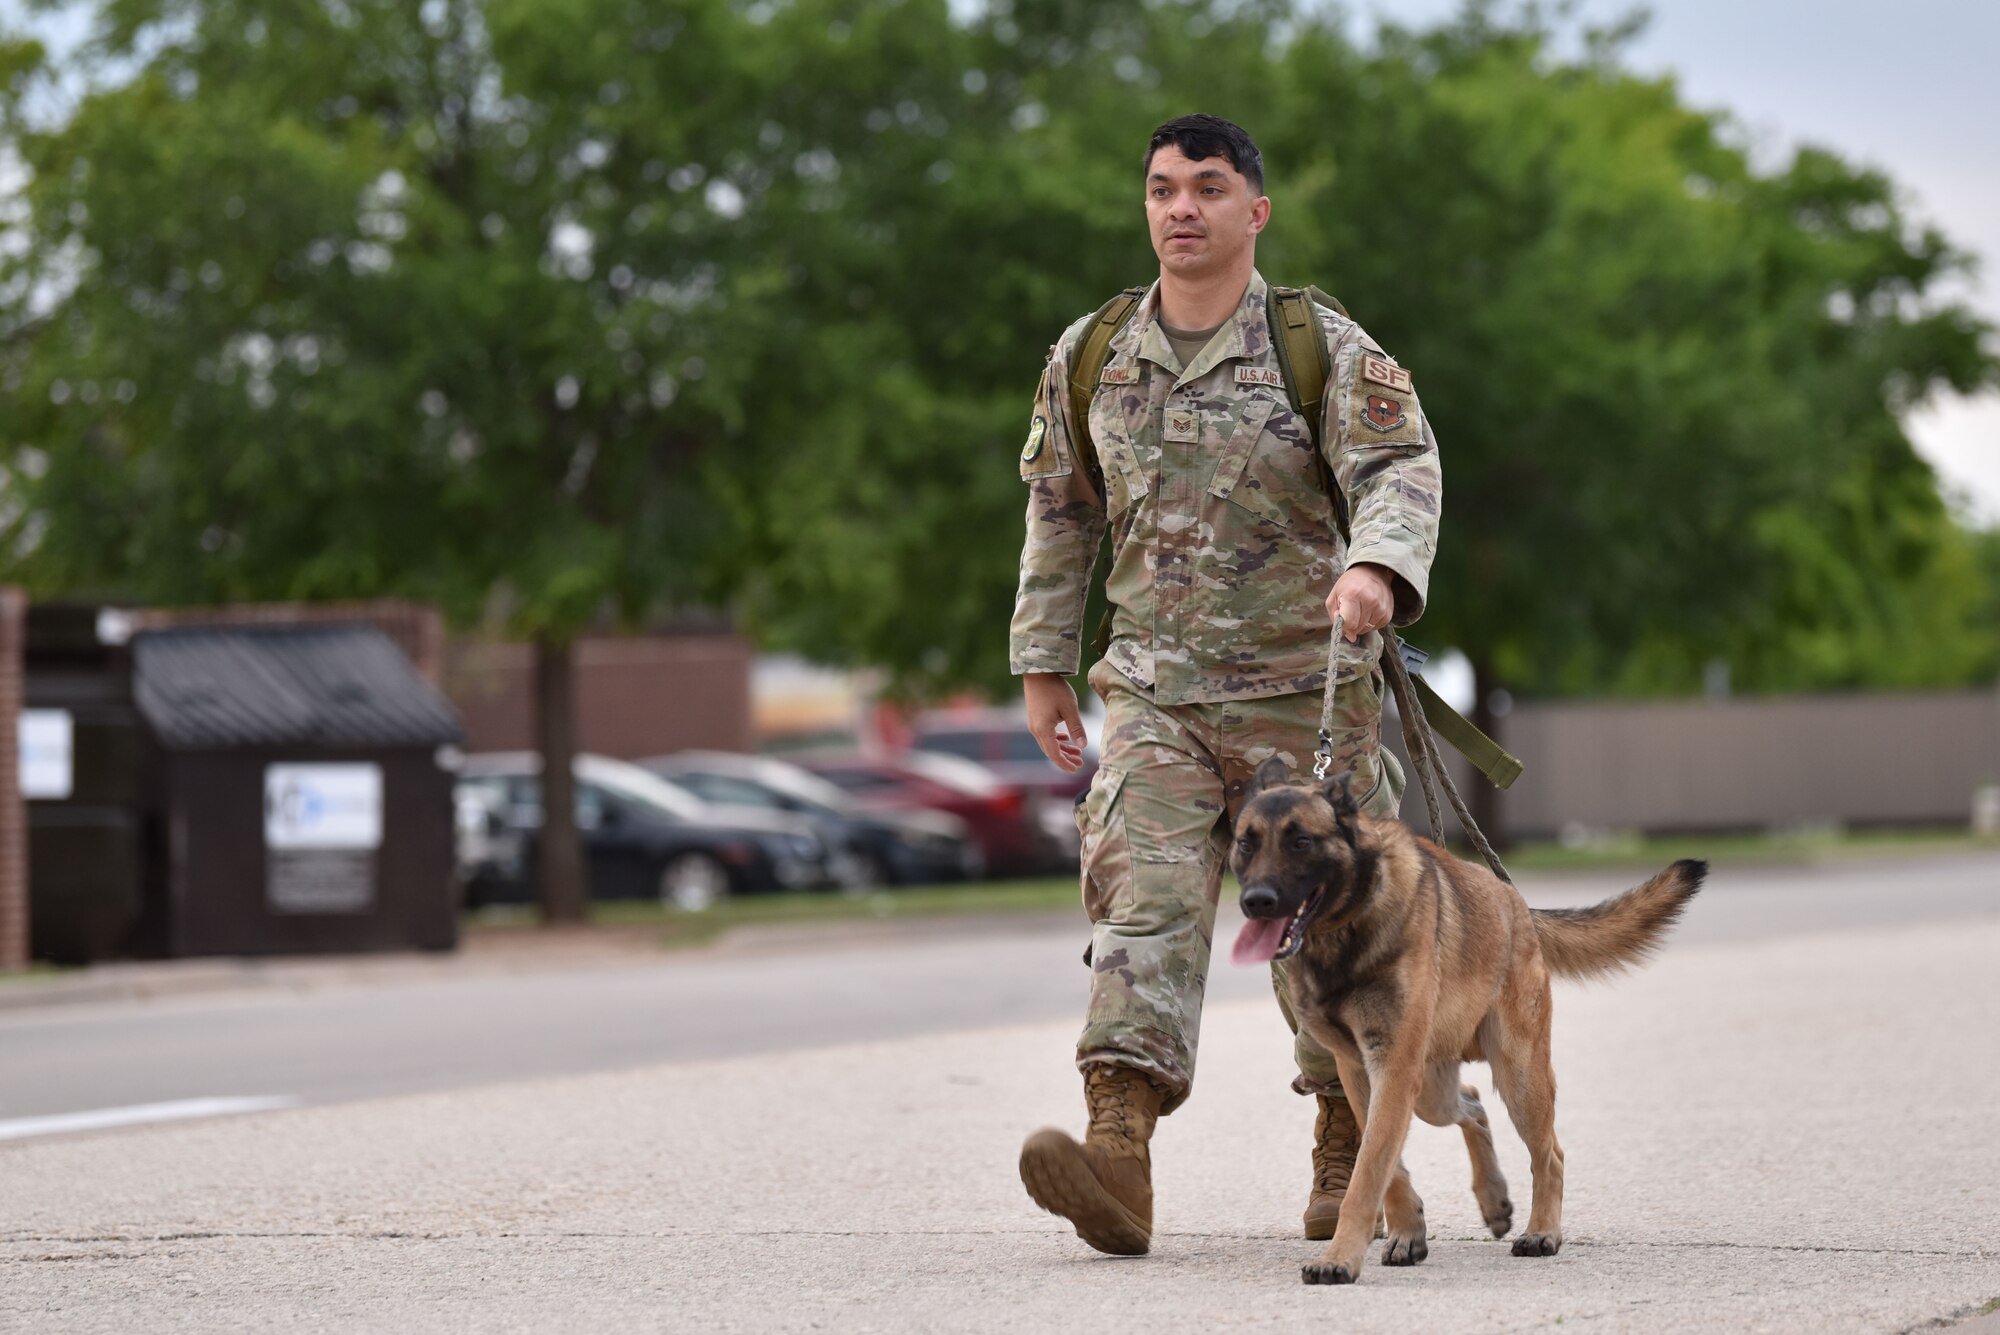 U.S. Air Force Staff Sgt. Nicholas Suitonu, 17th Security Forces Squadron military working dog handler, walks with Zekk, 17th SFS MWD, during a ruck around Goodfellow Air Force Base, Texas, May 10, 2021. The ruck was the first of several events held during National Police Week. (U.S. Air Force photo by Staff Sgt. Seraiah Wolf)